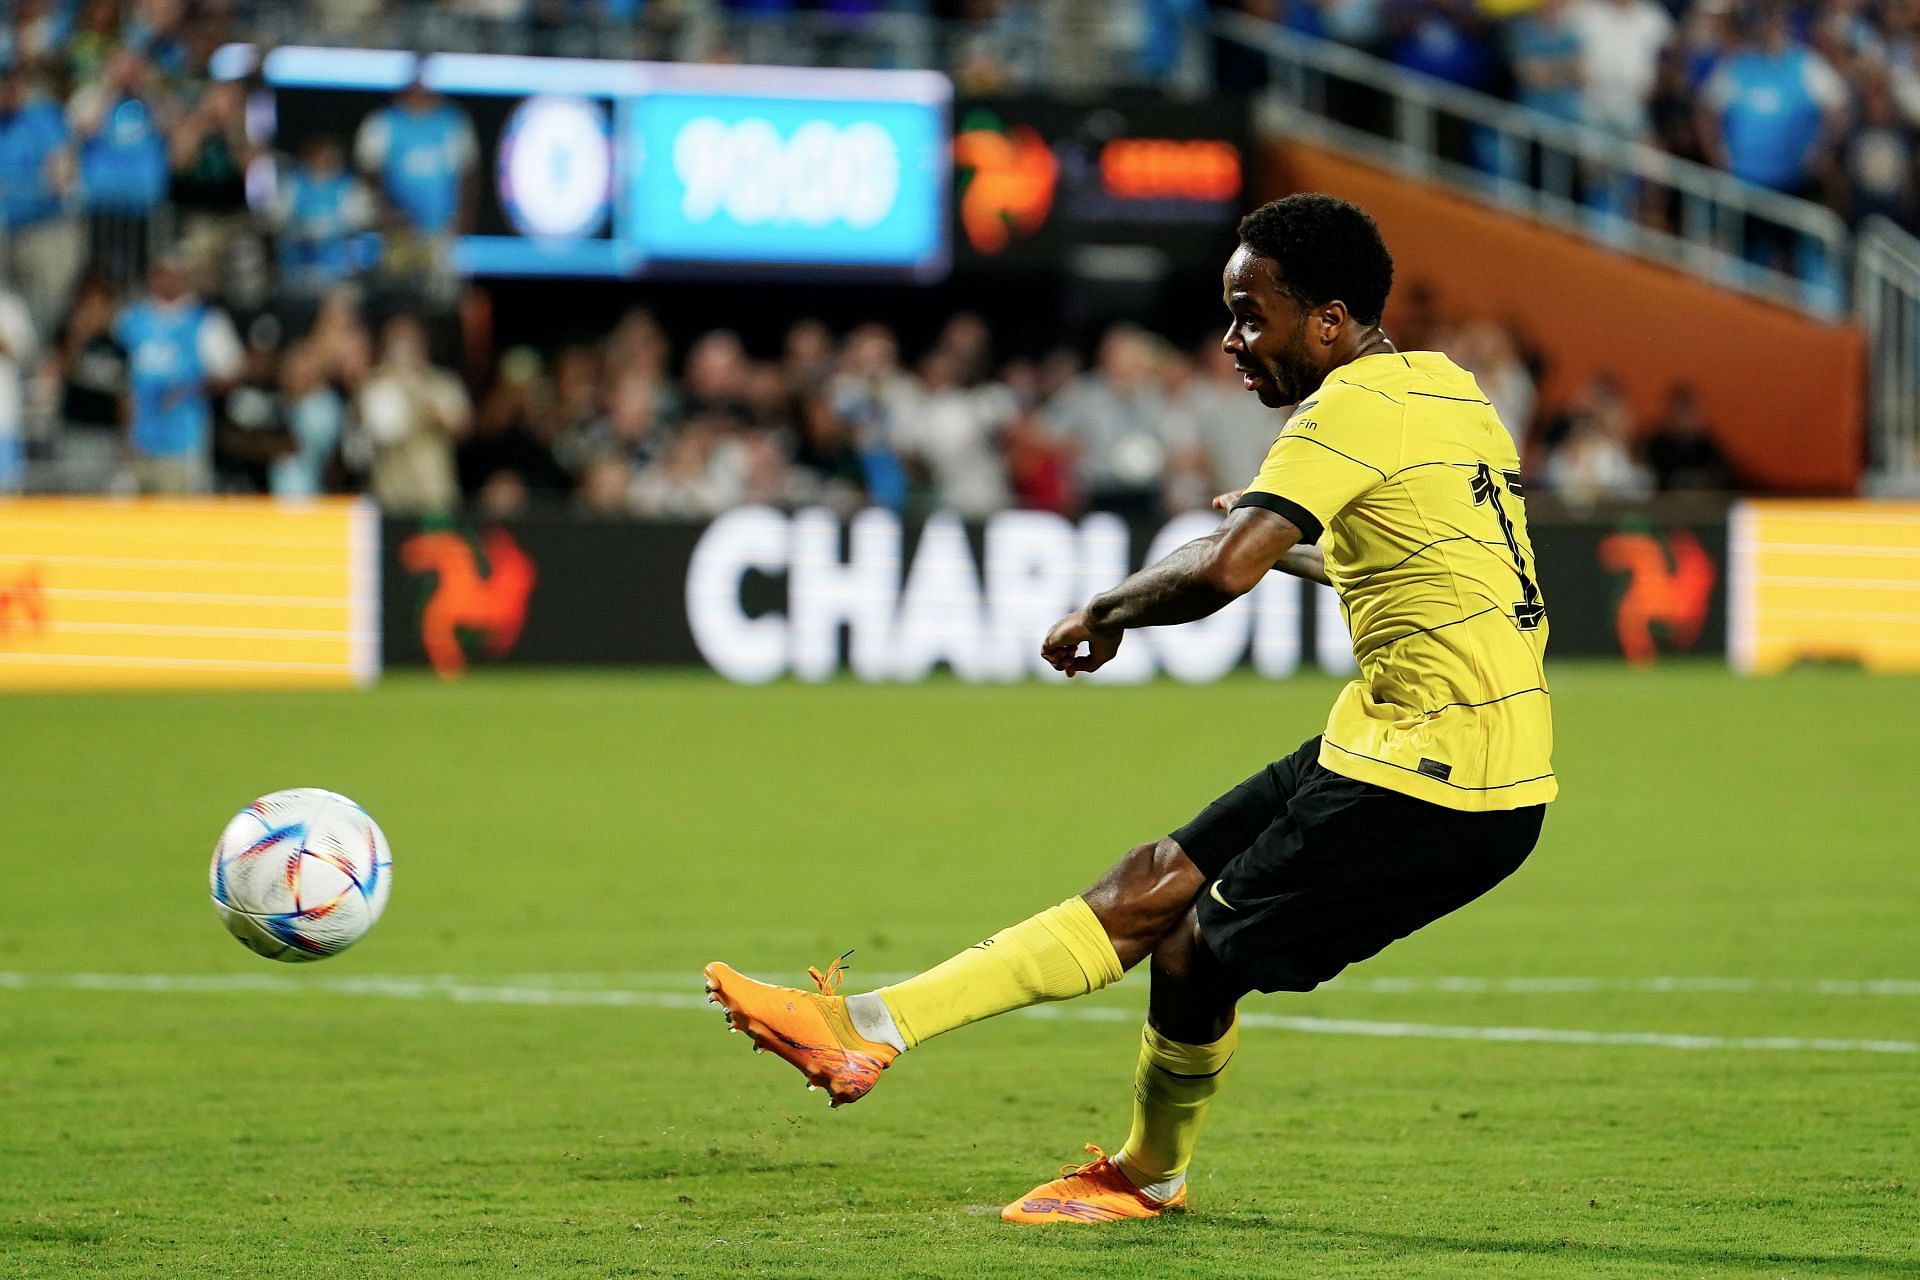 Raheem Sterling was on the score sheet against Udinese.